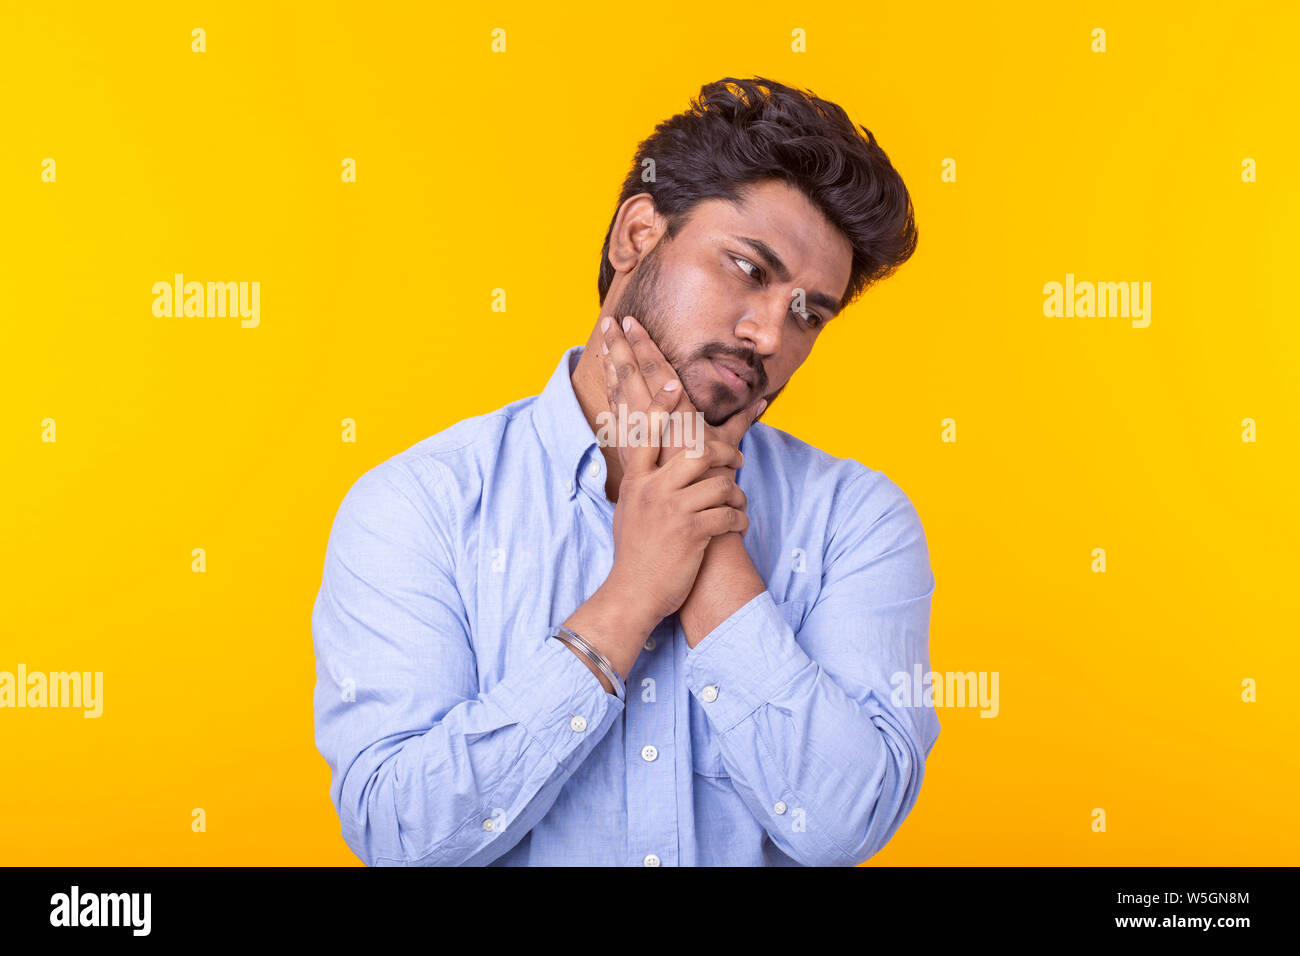 Apathetic cute young indian man is posing on a yellow background with copy space and thinking about something. Concept of unfulfilled dreams. Stock Photo